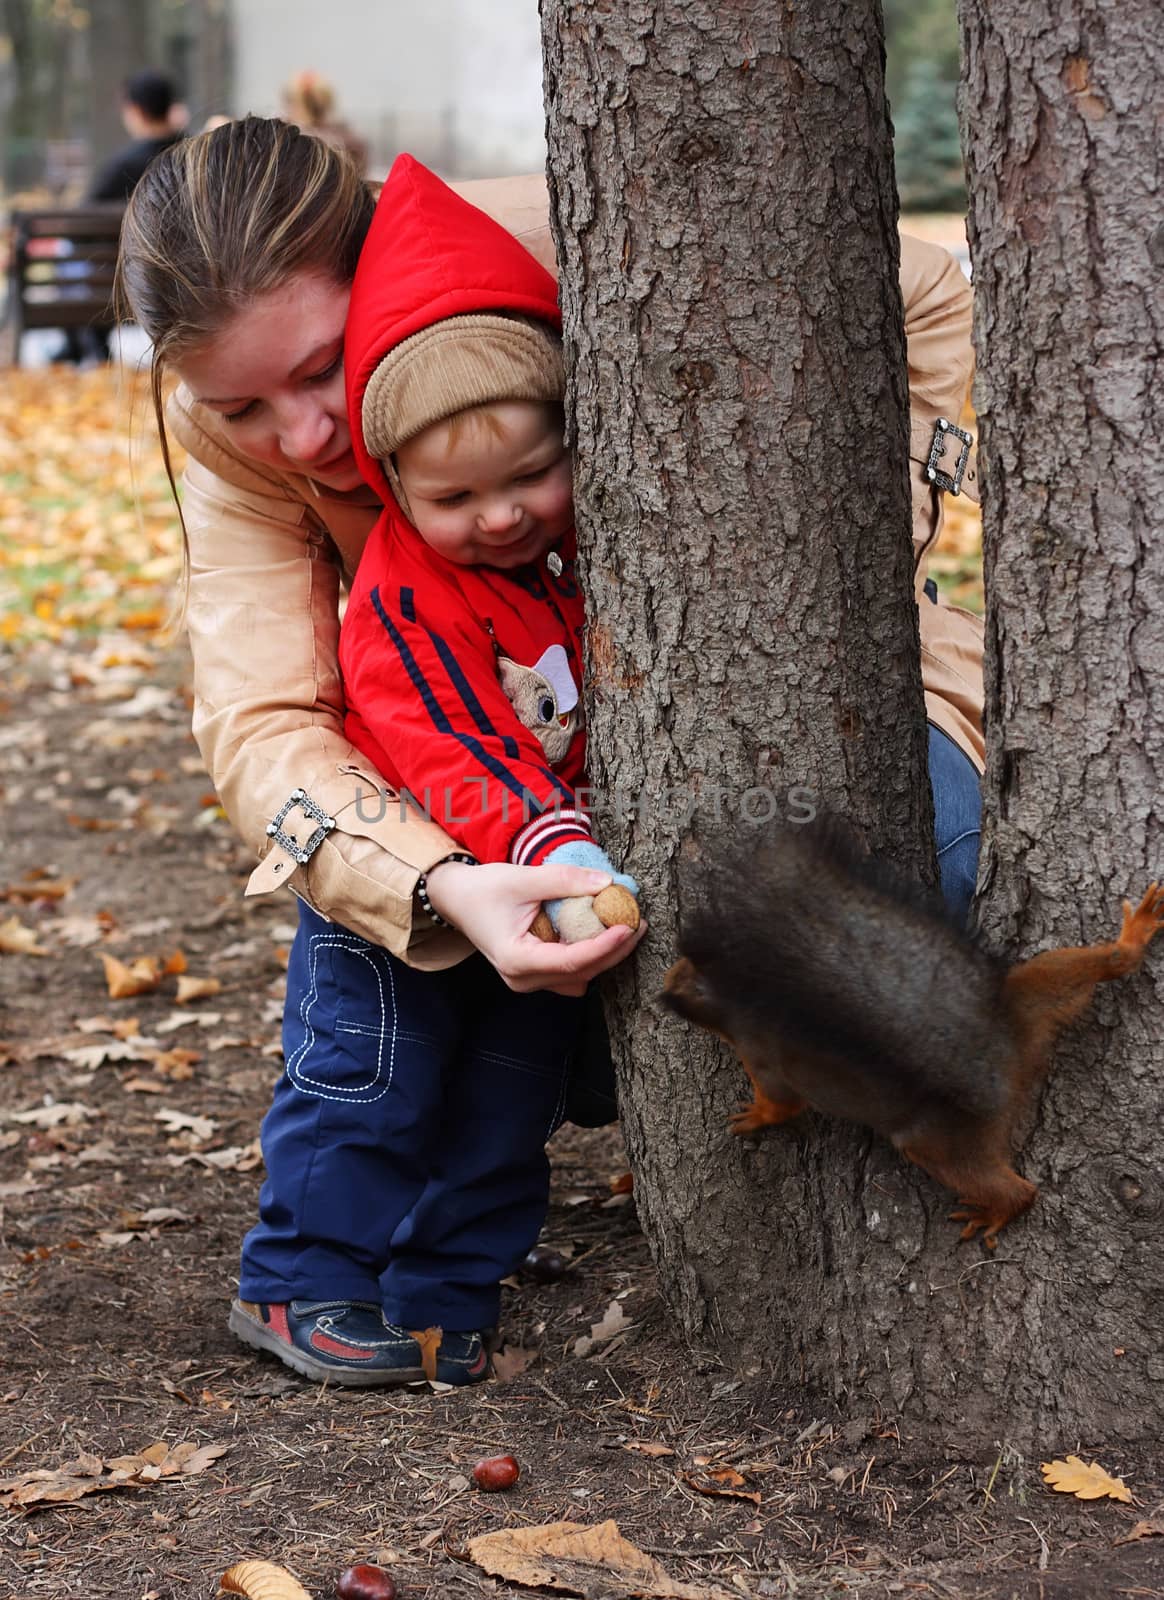 Little boy with mother feeds a squirrel in a park